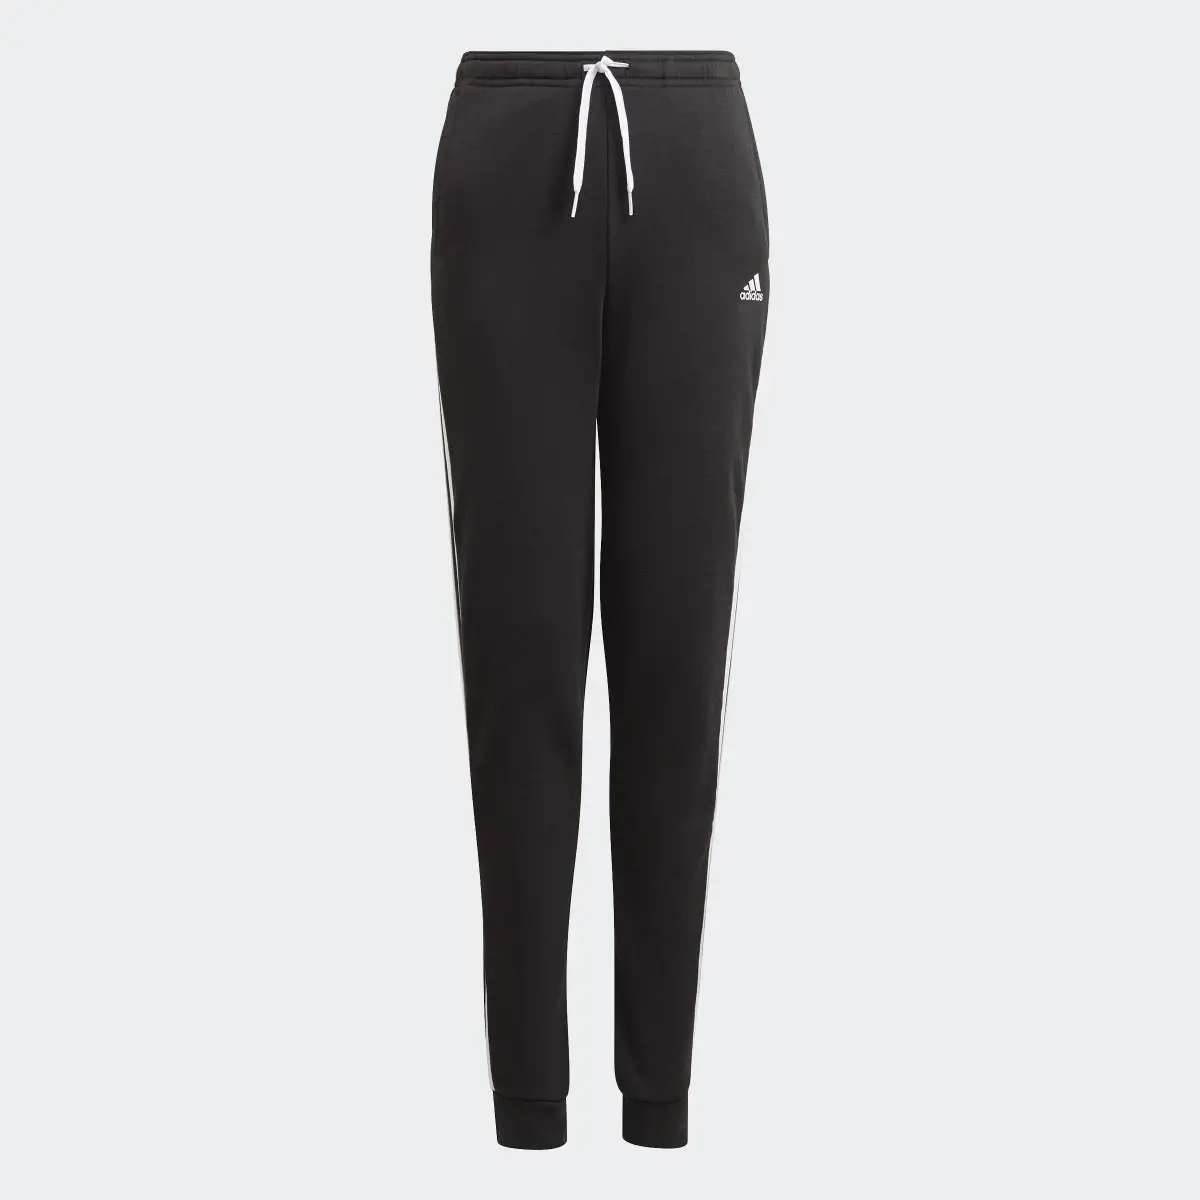 Adidas Essentials 3-Stripes French Terry Pants. 1